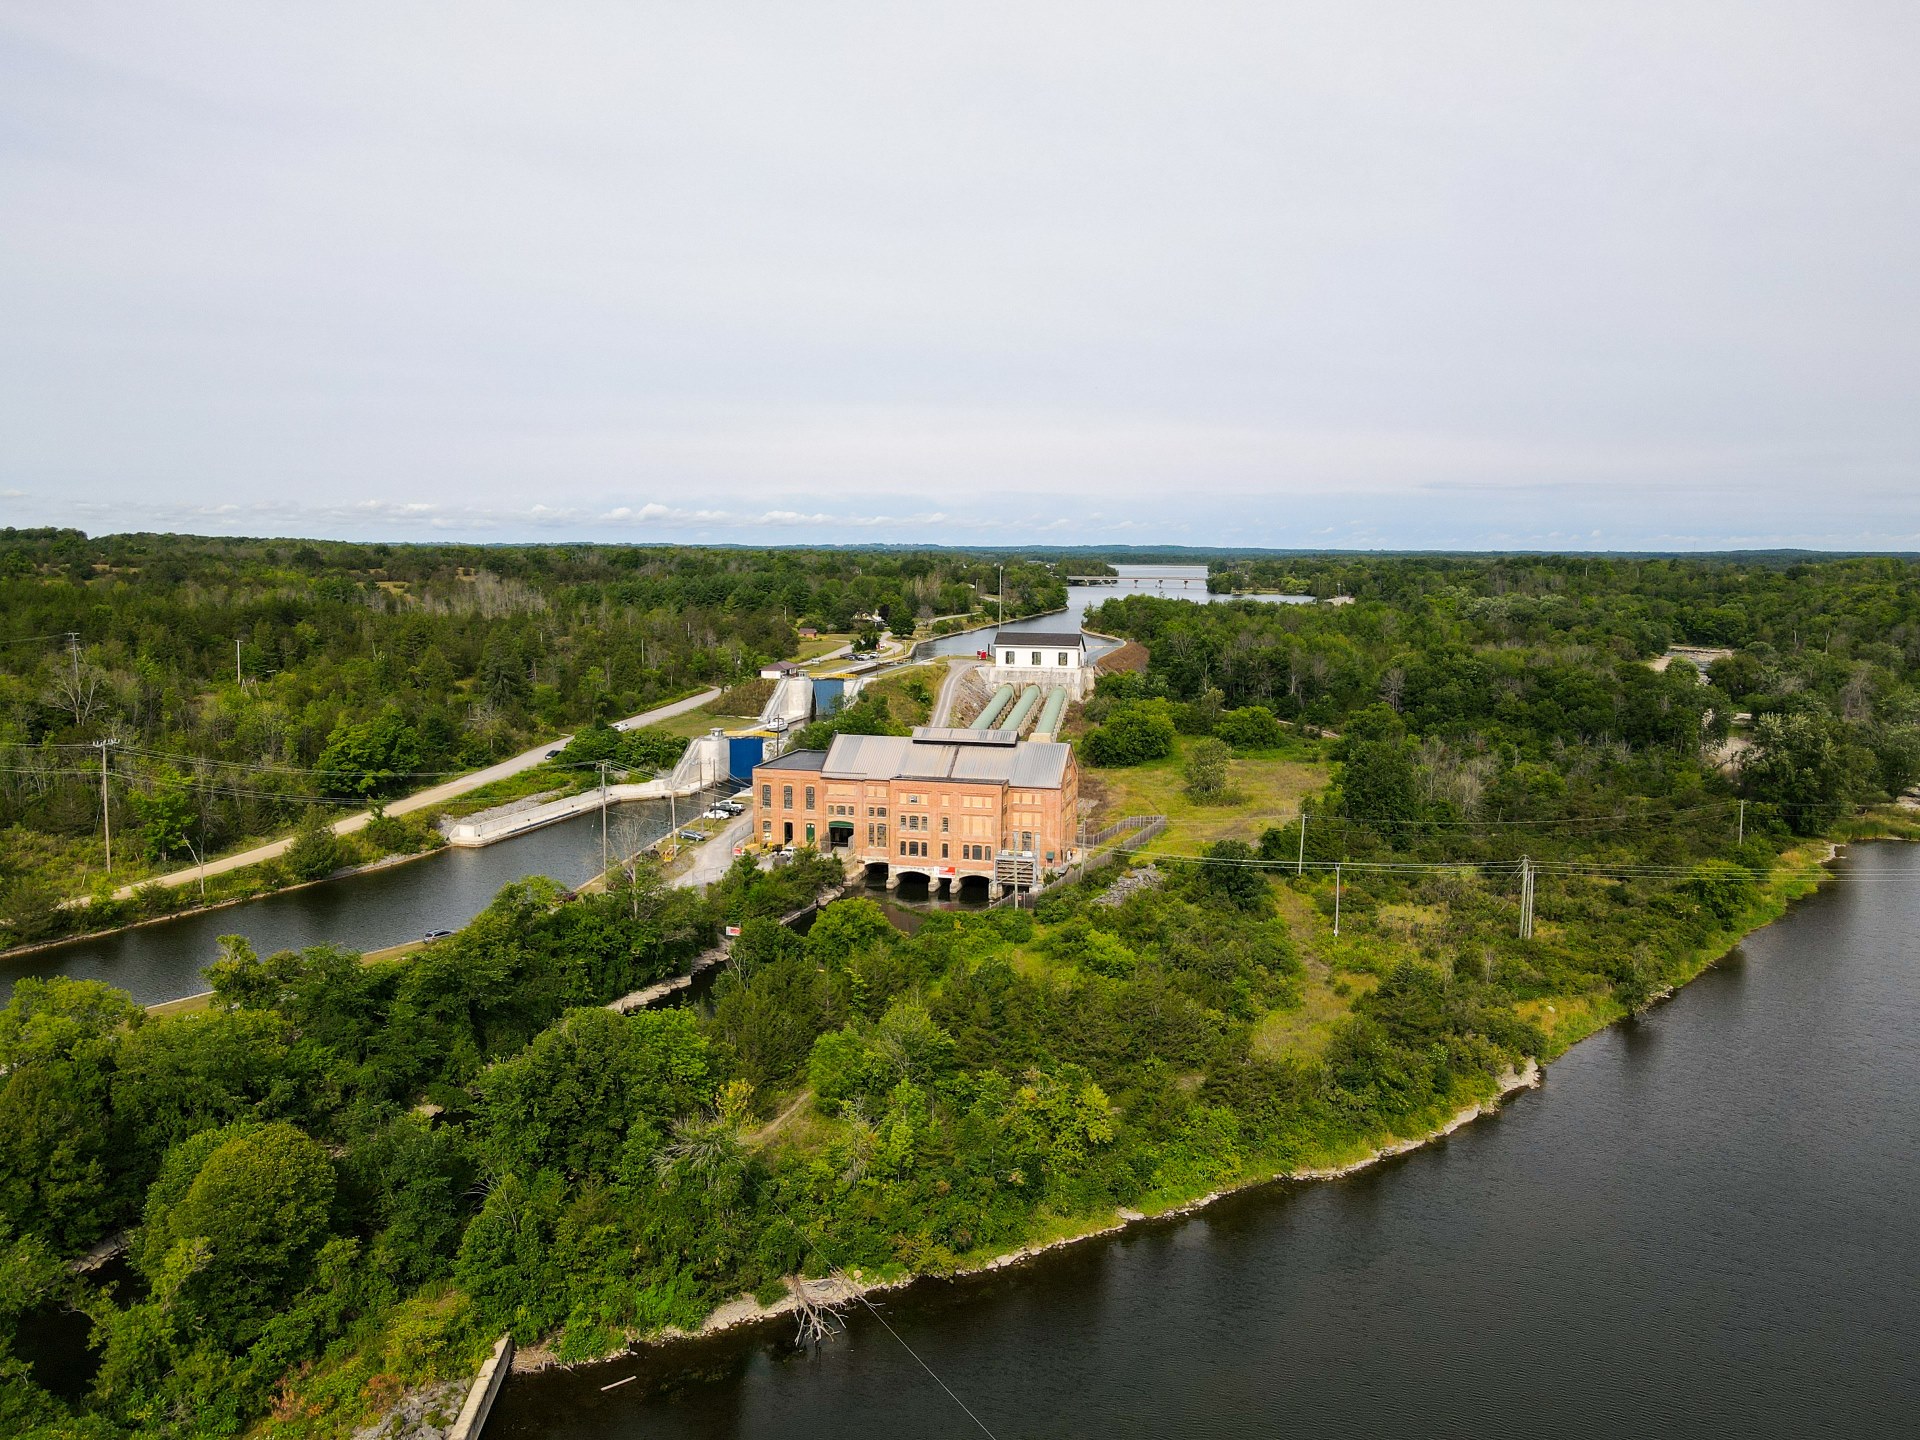 A view of OPG's Healey Falls Generating Station, located on the Trent-Severn Waterway near Campbellford.